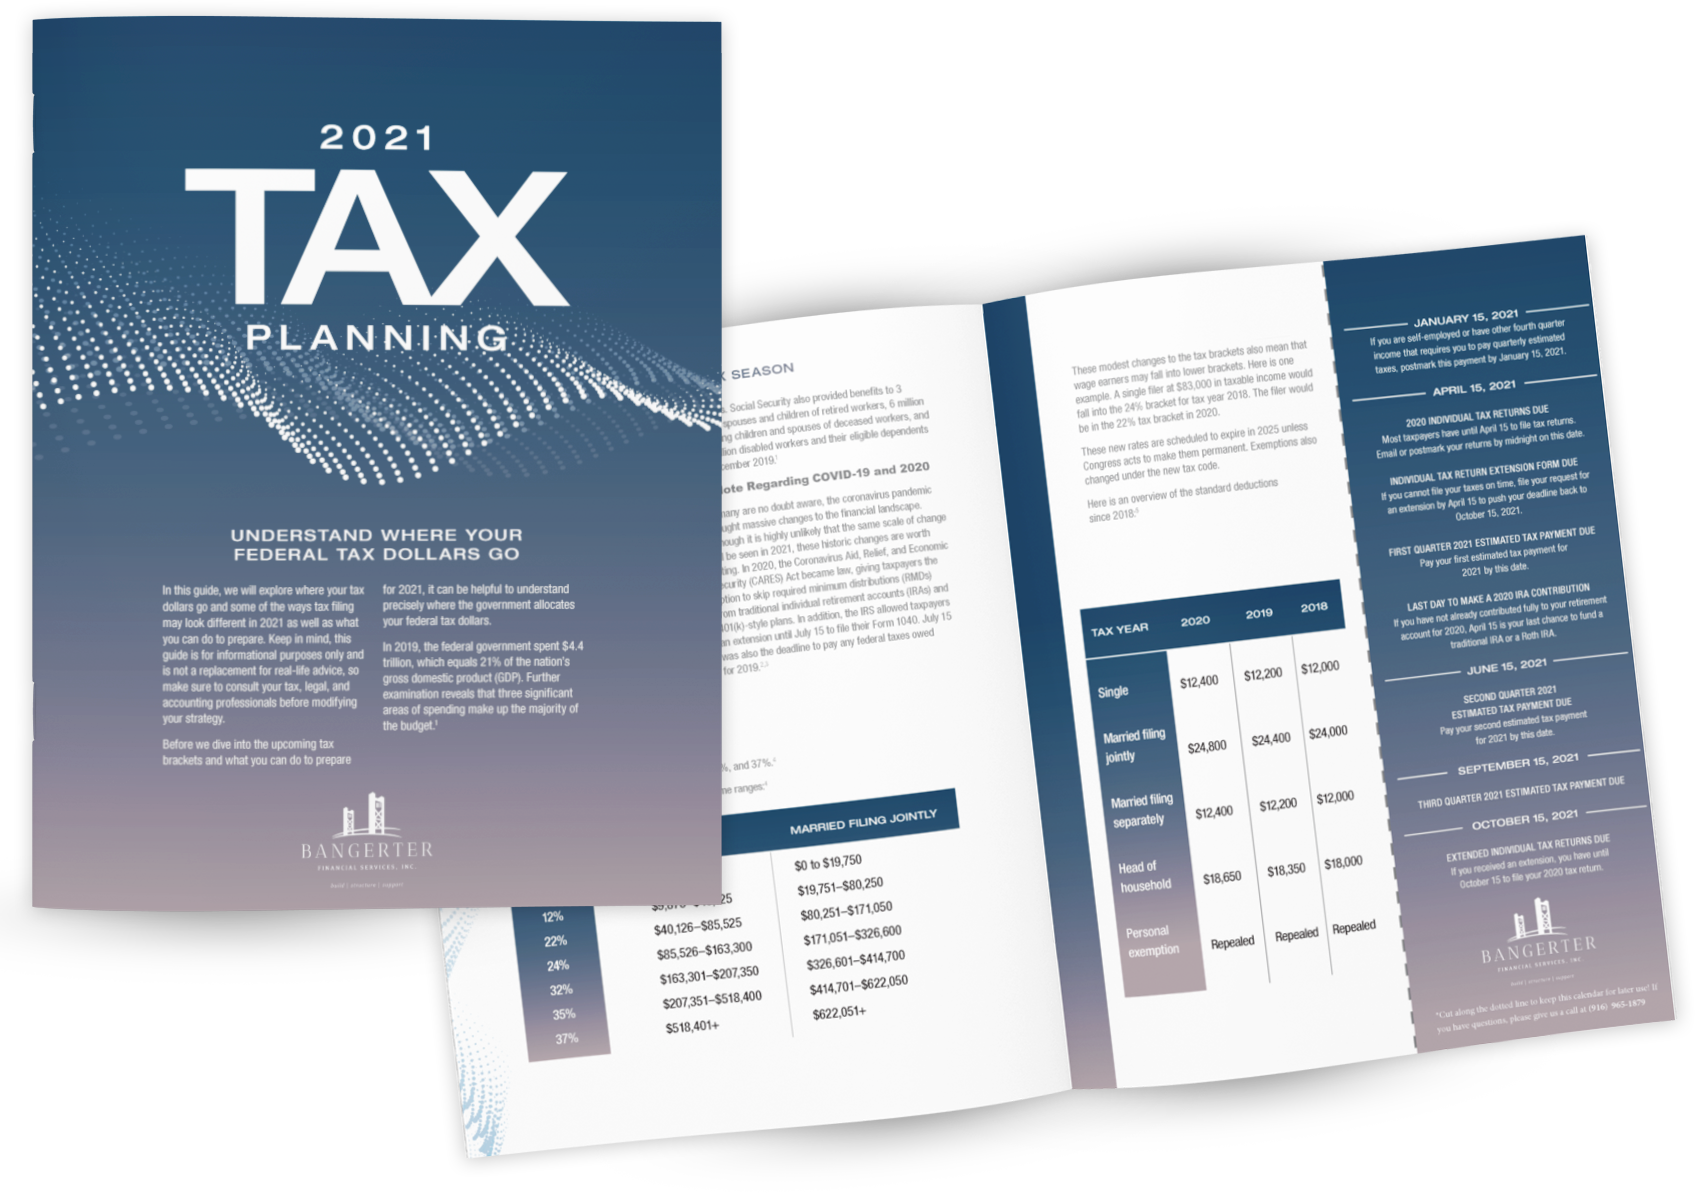 2021 Tax Planning Guide